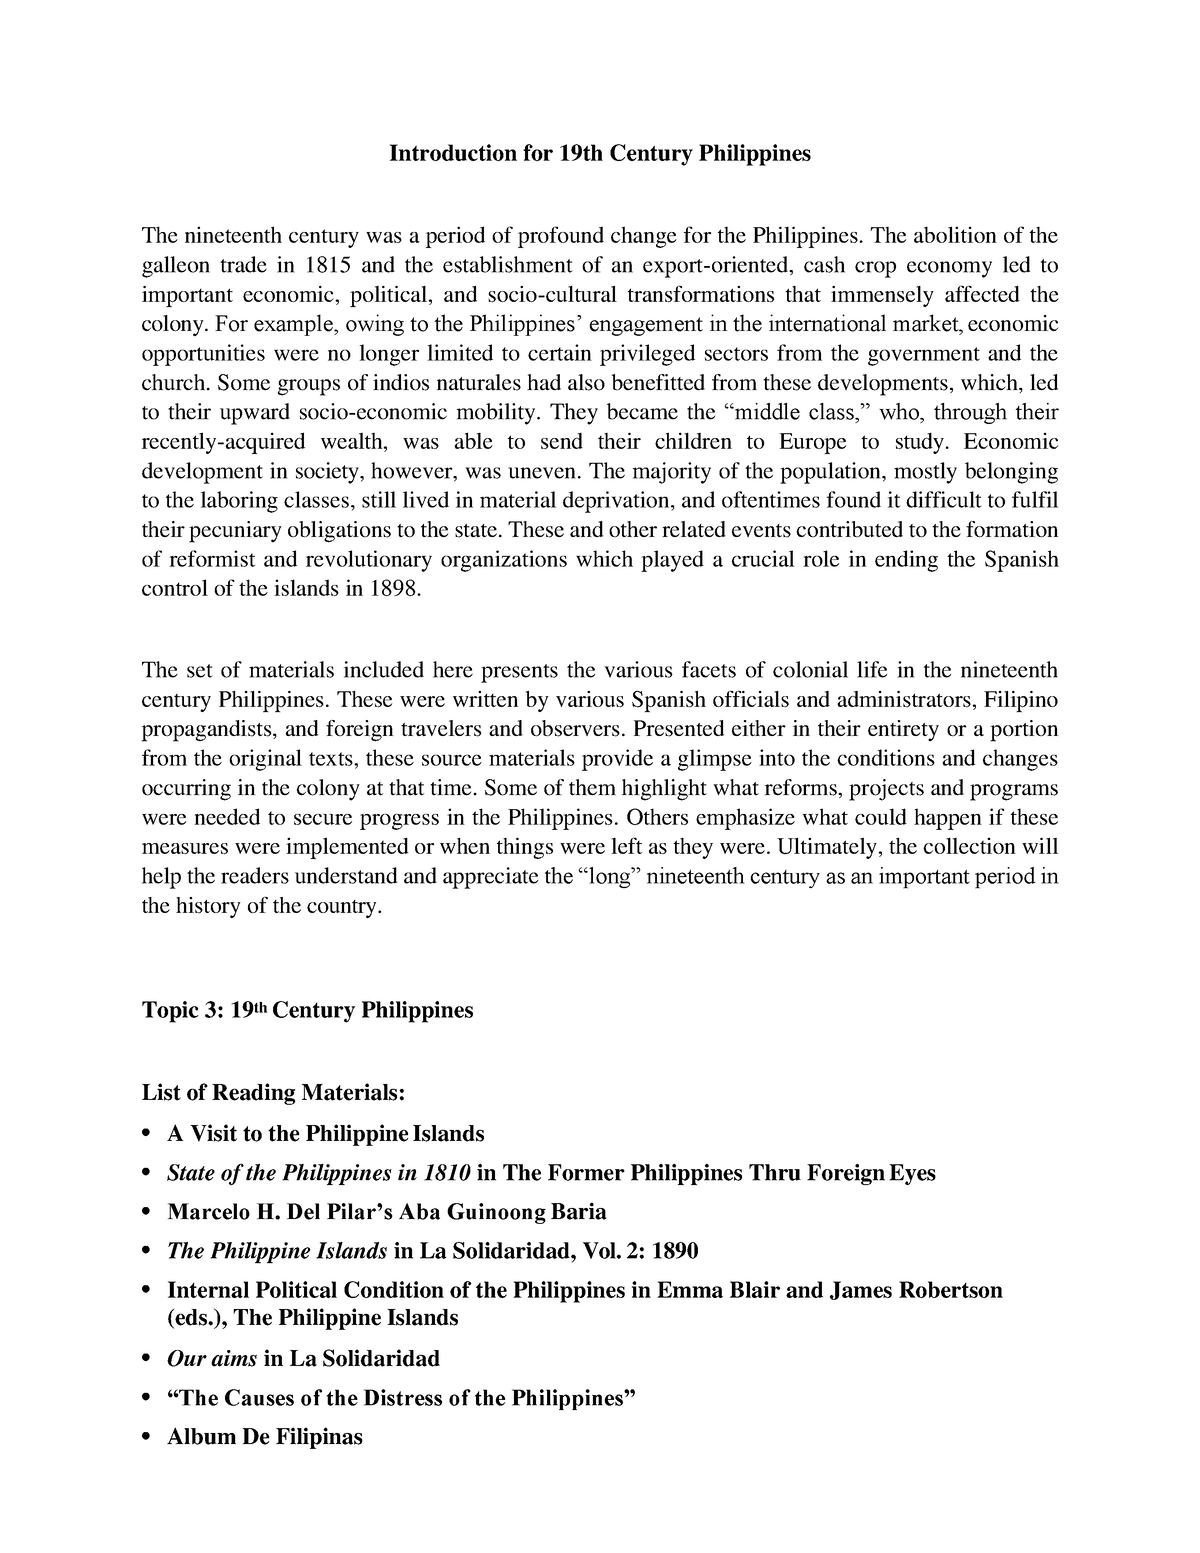 Copy of 19th Century Philippine ( Primary Sources) - Introduction for ...